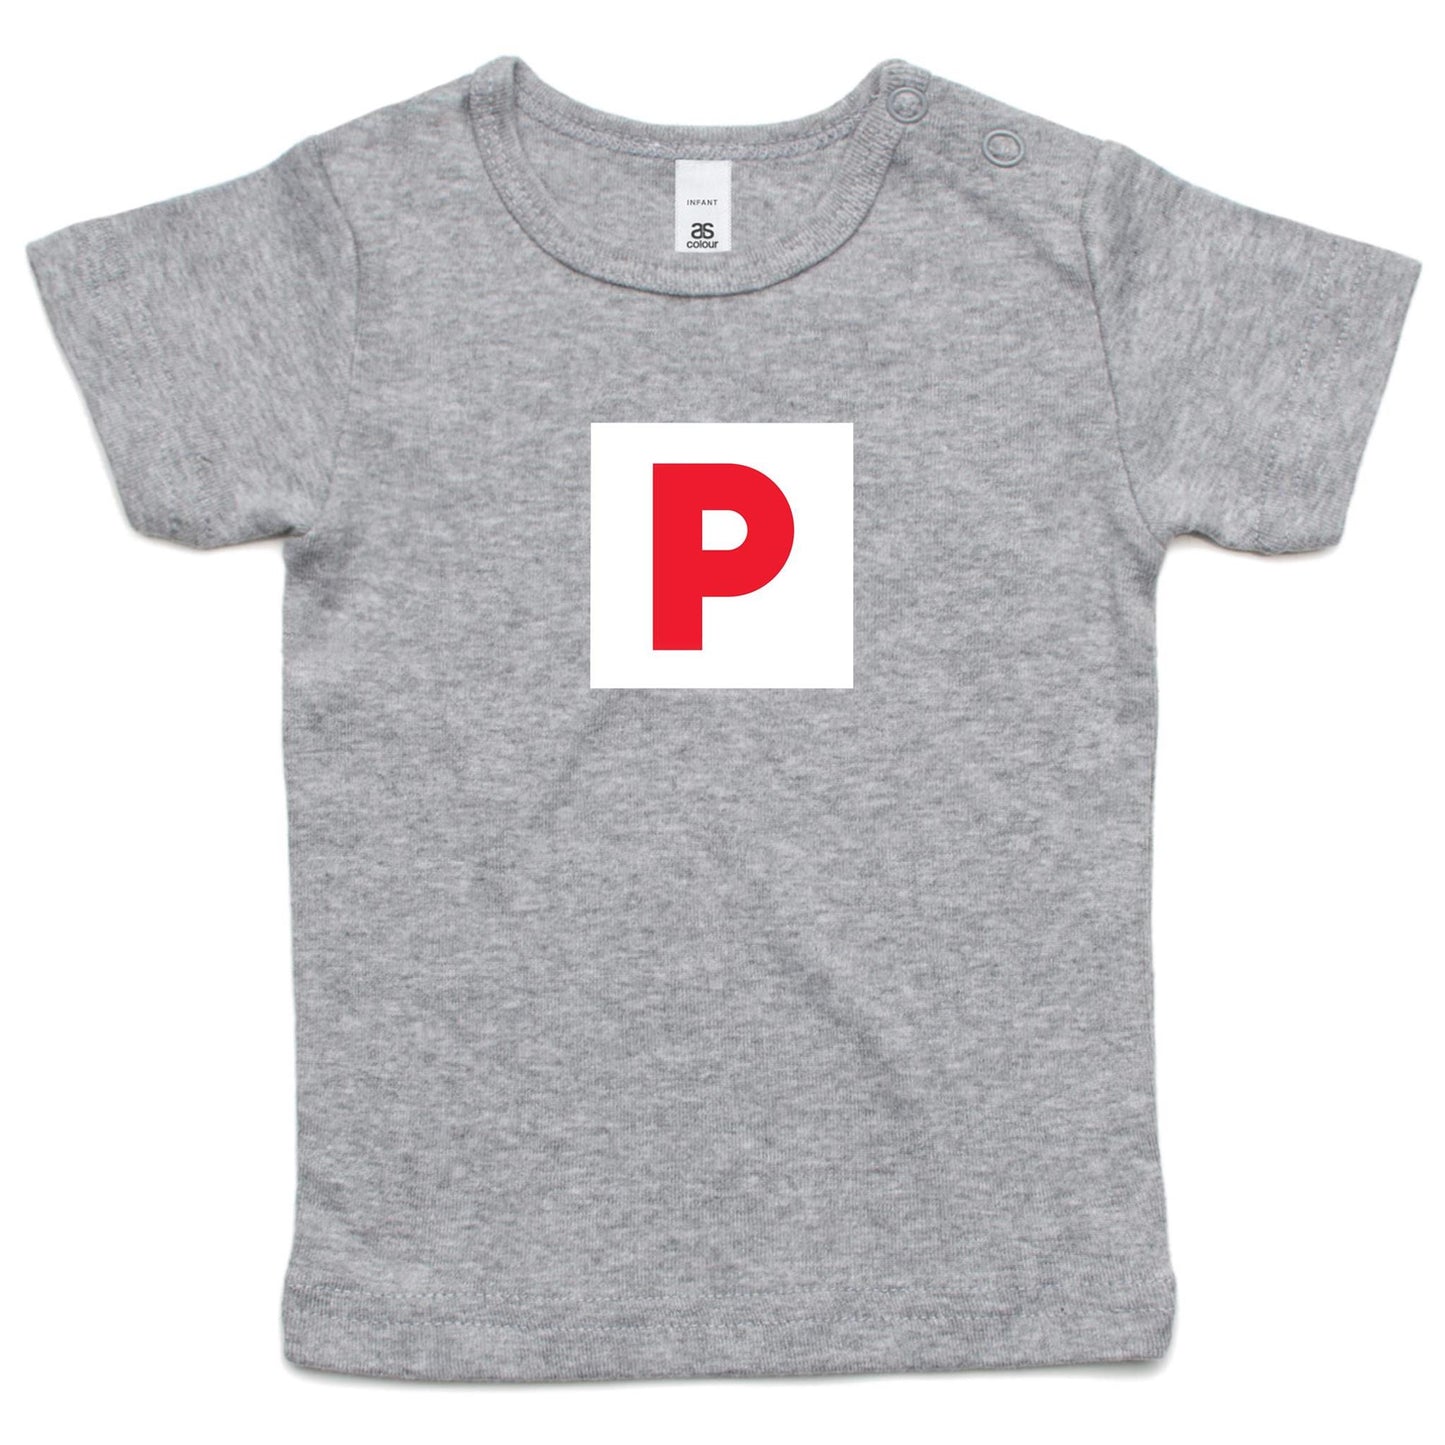 P Plate T Shirts for Babies